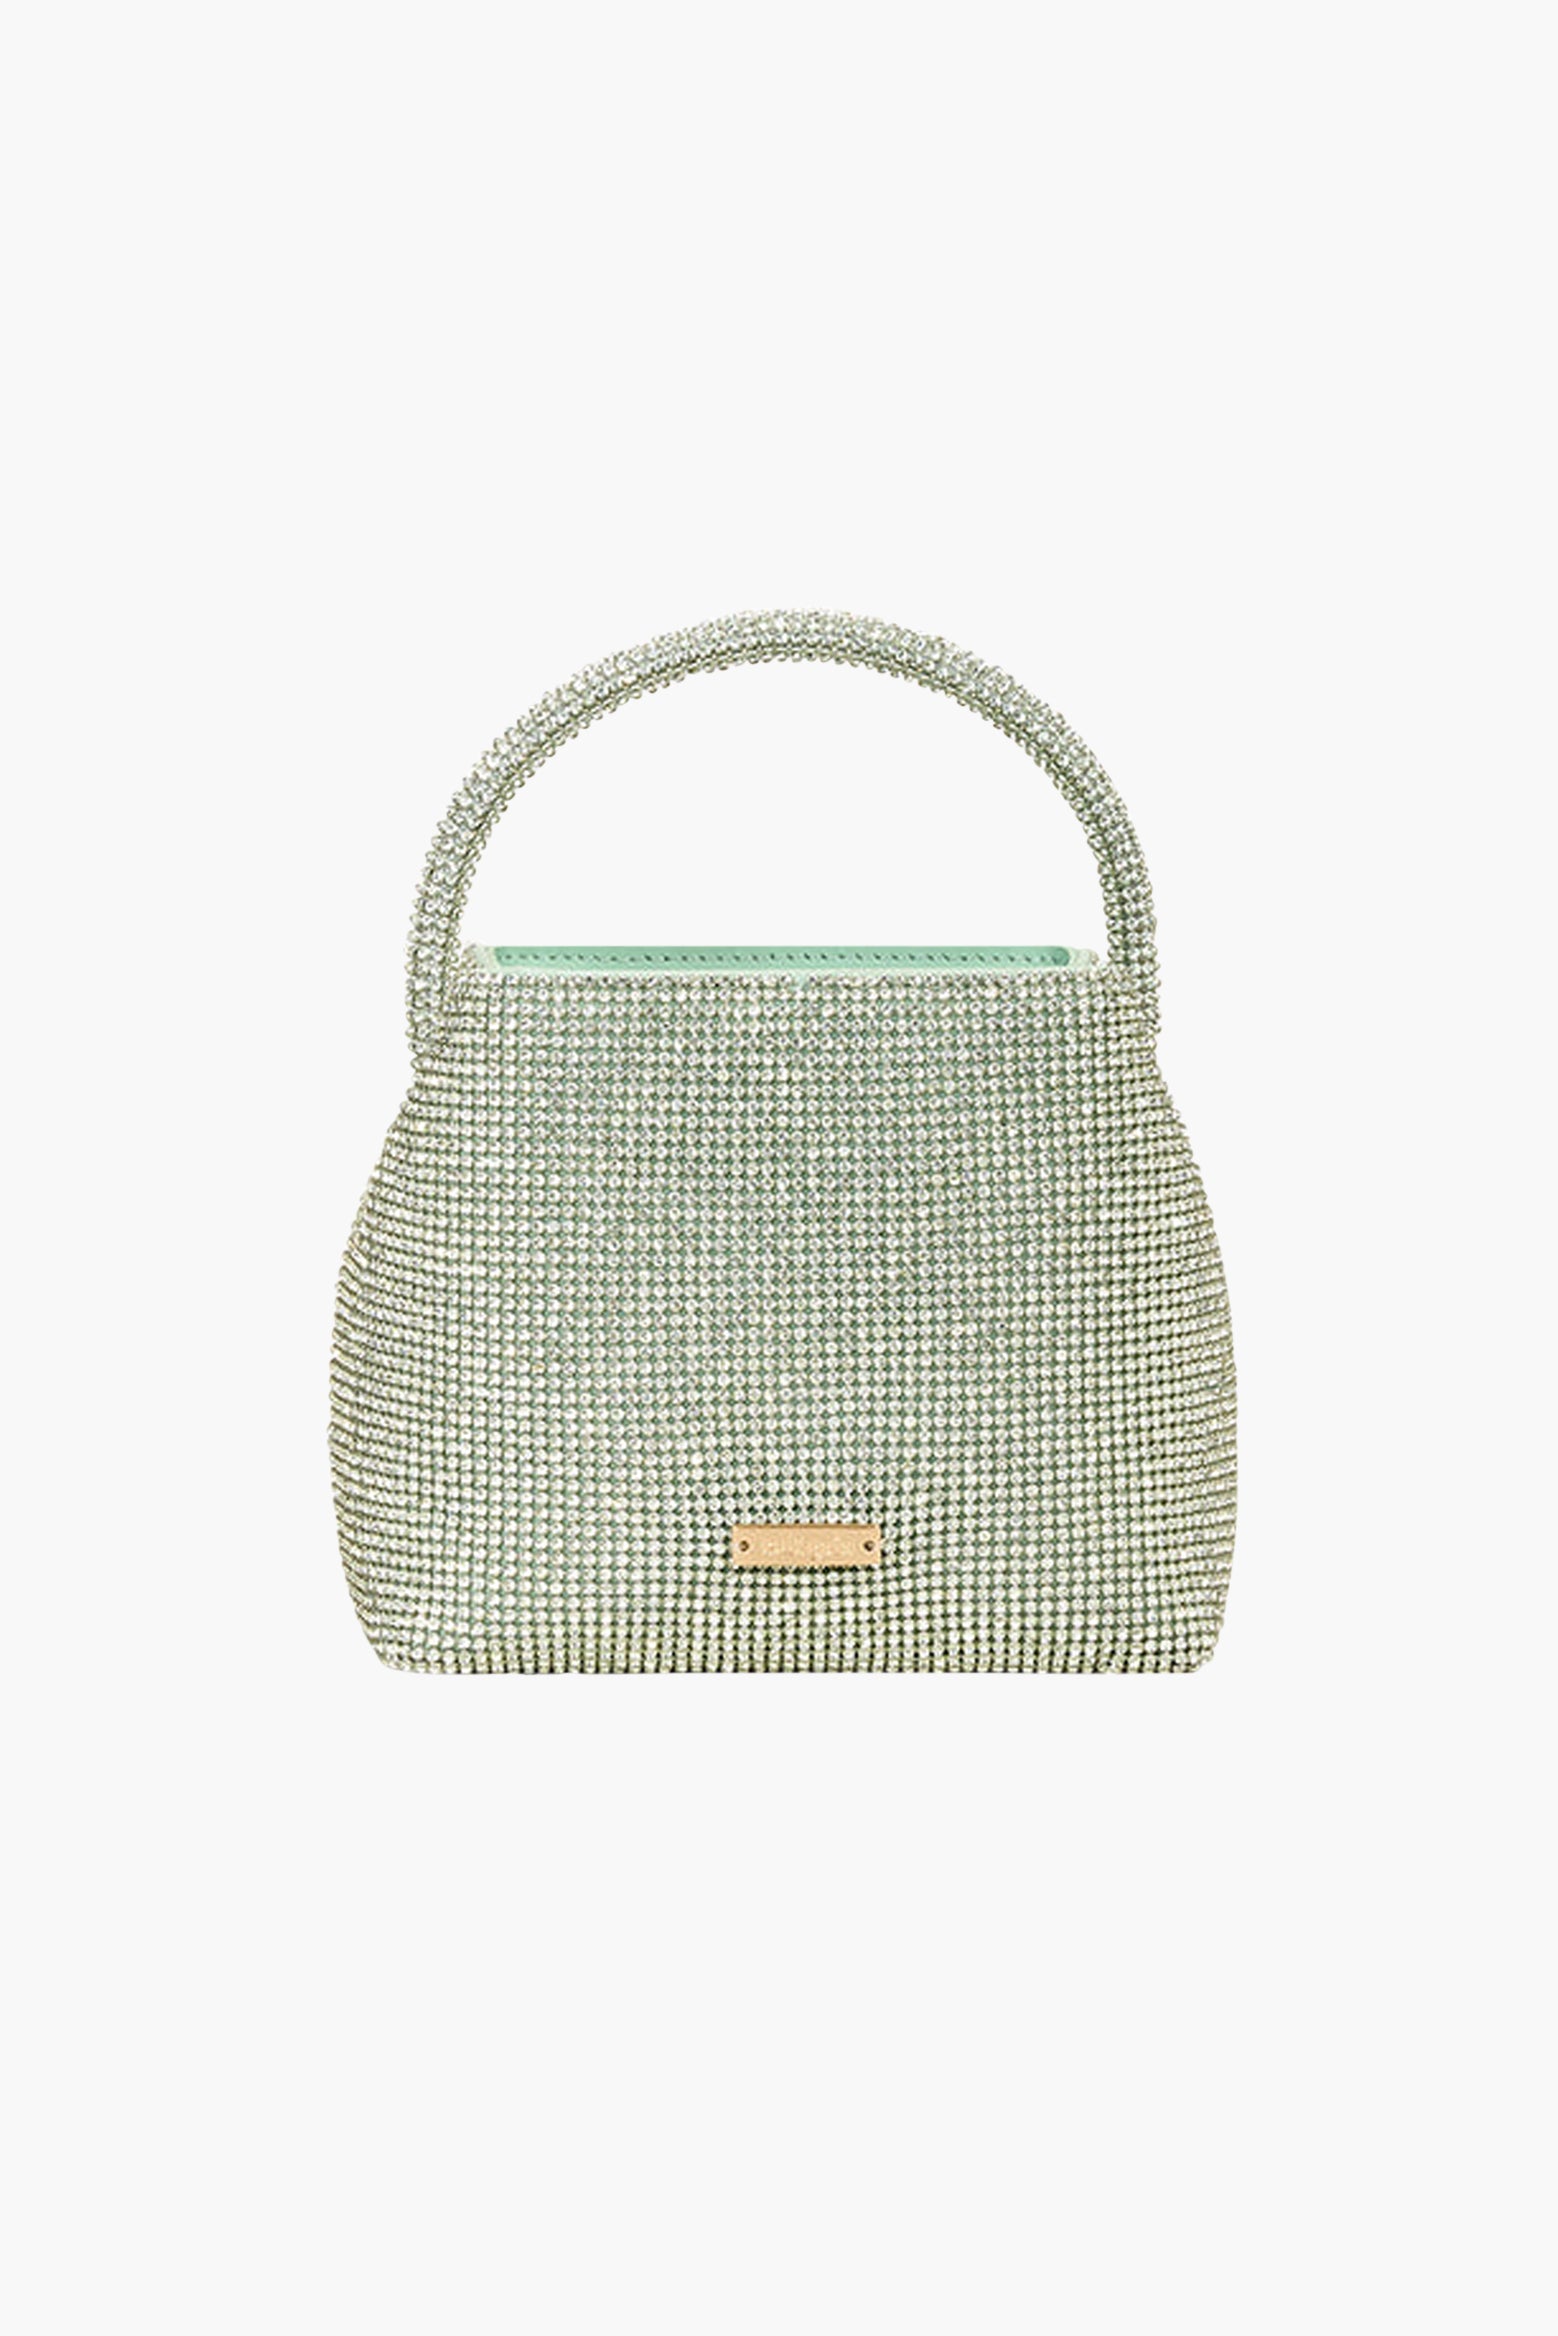 Cult Gaia Solene Mini Top Handle Bag in Pale Sage available at TNT The New Trend Australia.